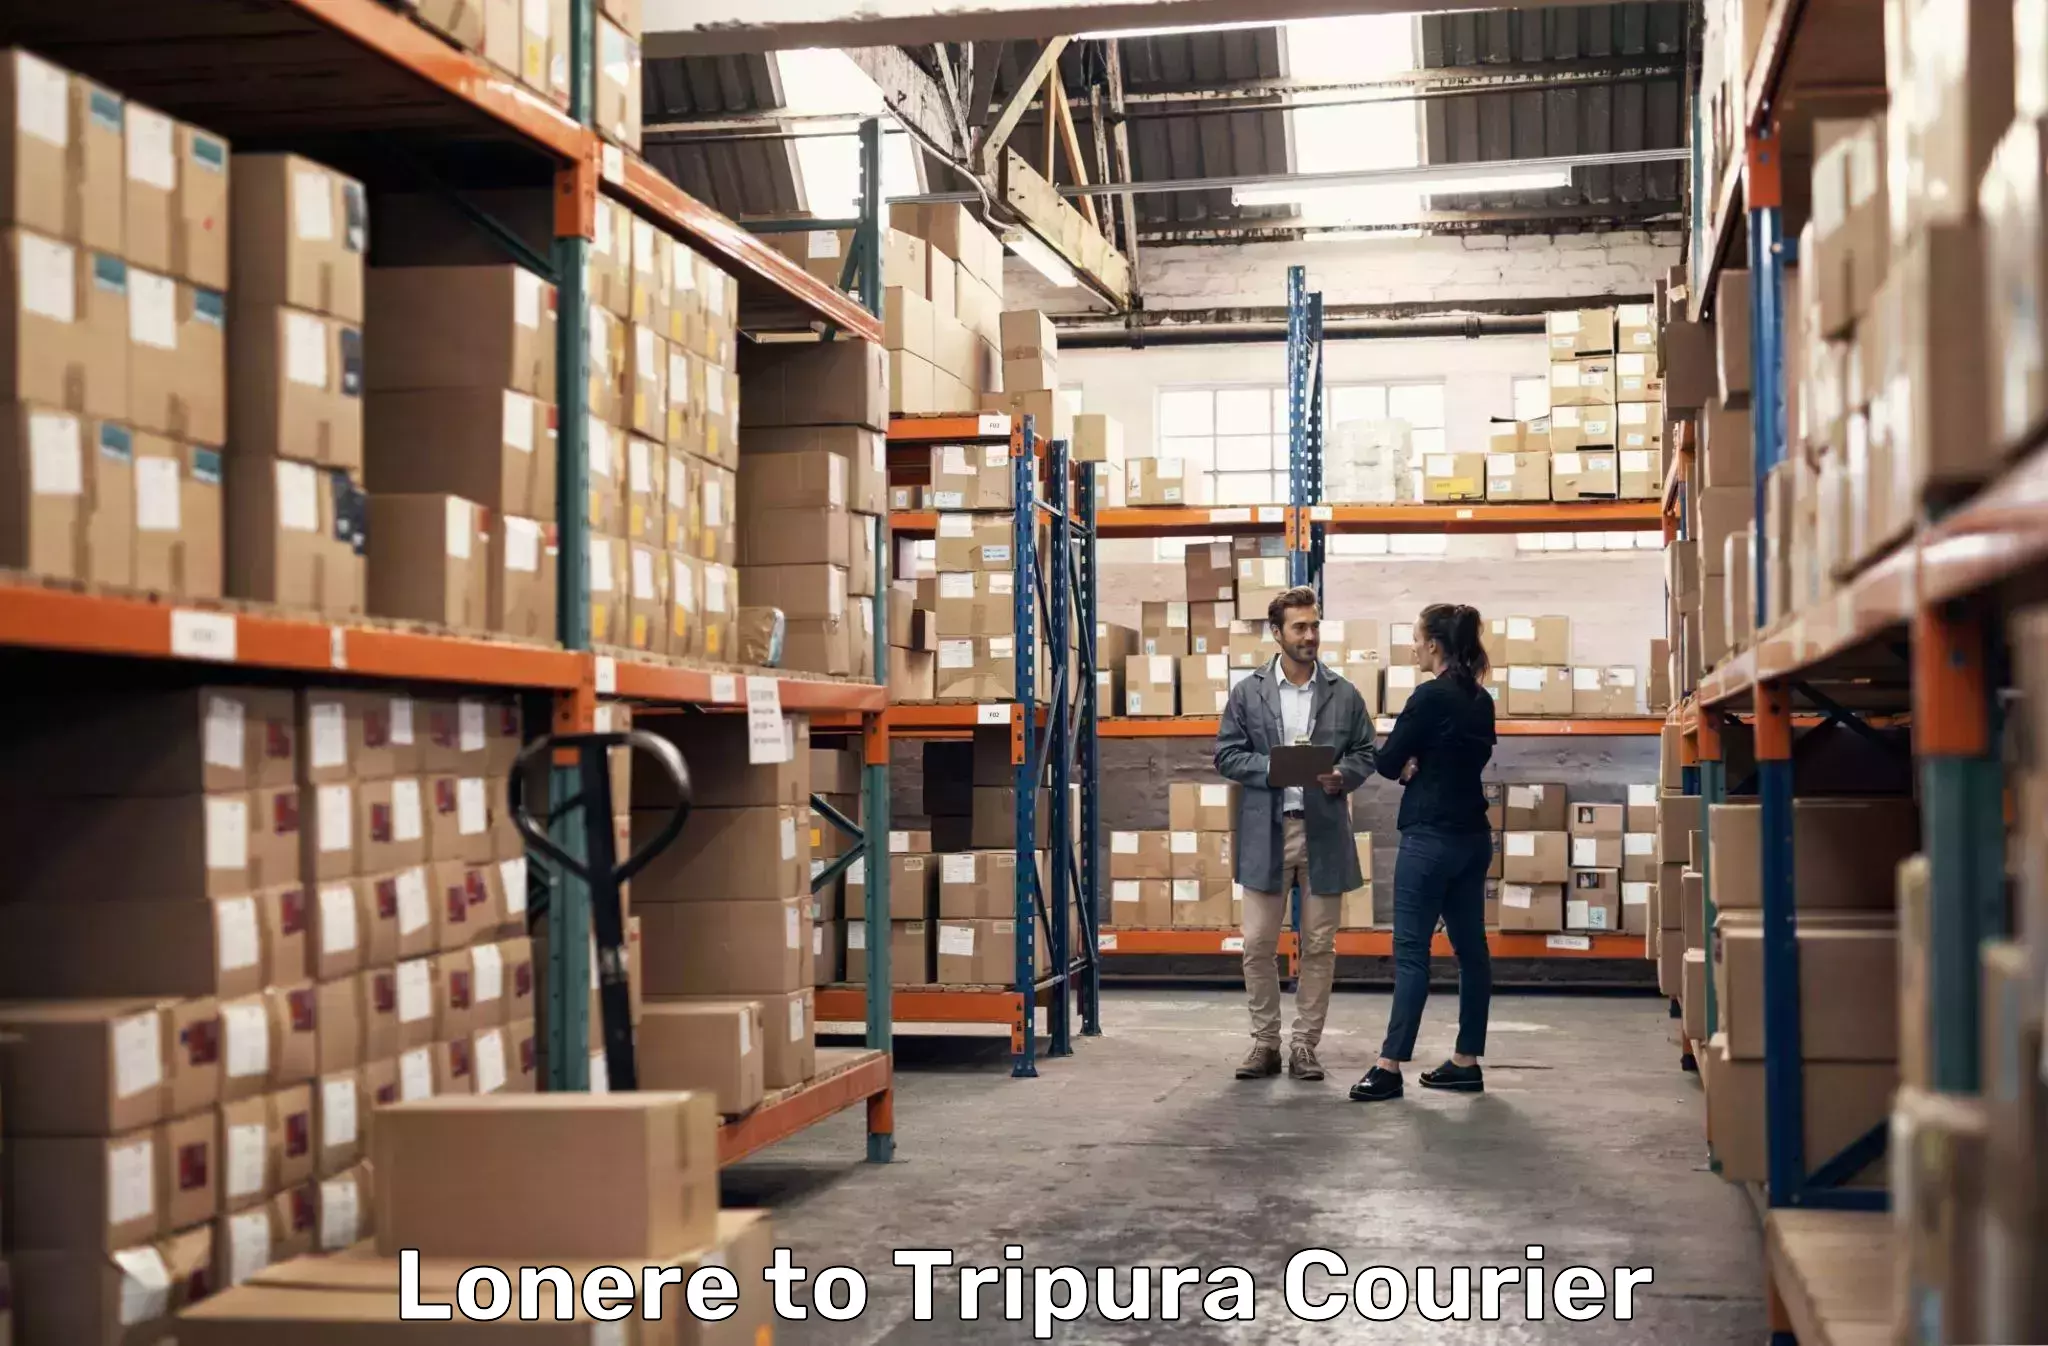 Courier service efficiency Lonere to Tripura